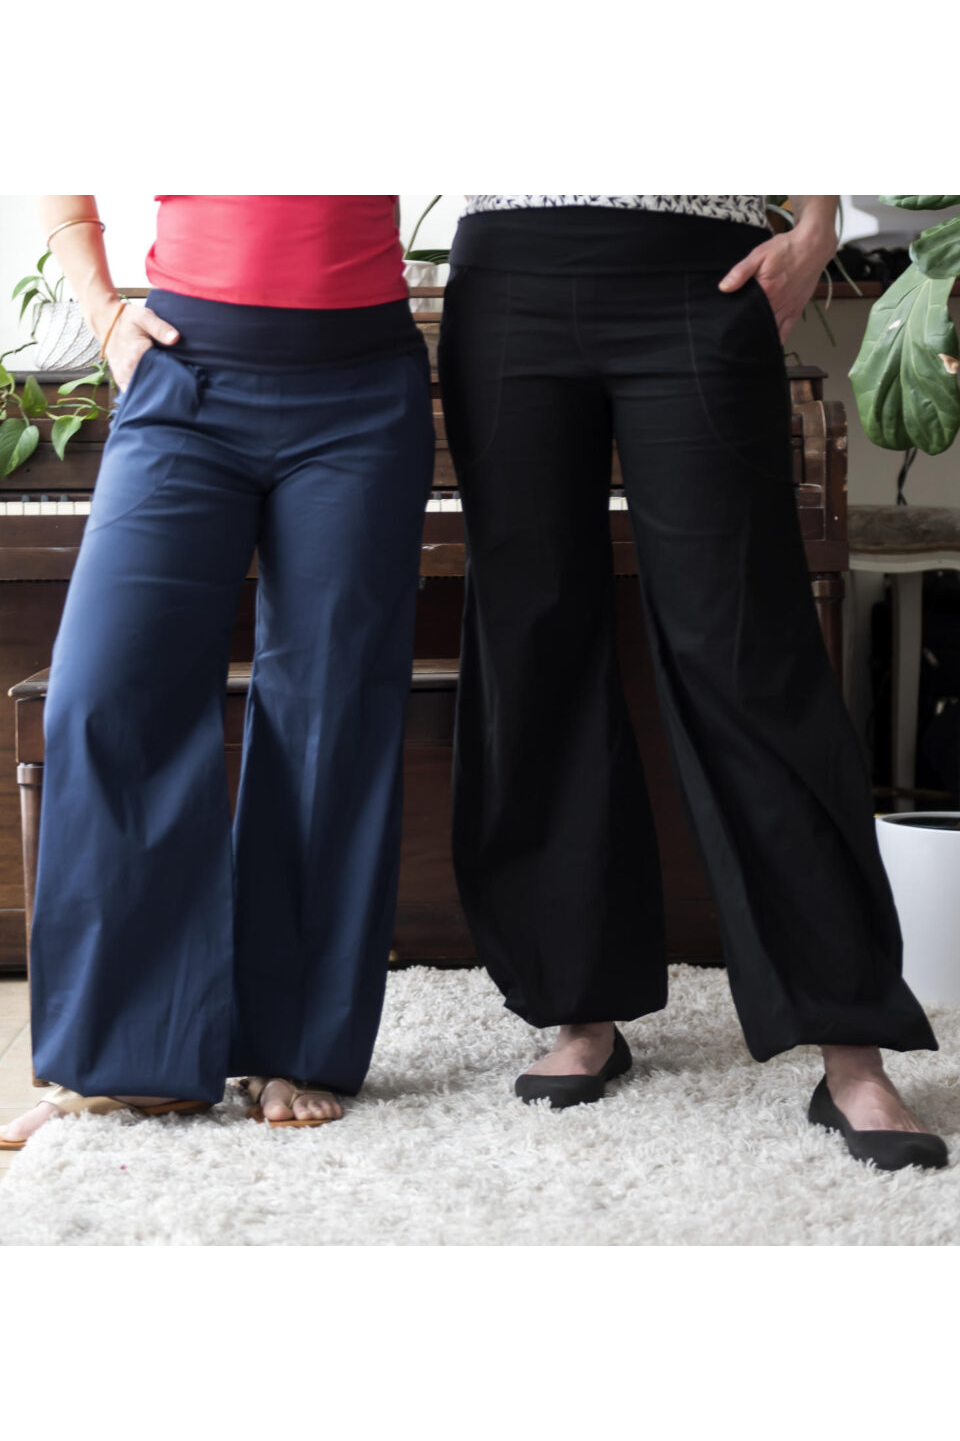 Pouf Ete Pants by Marie C, Black or Navy, wide pull-on waistband, wides that puff out and gather at the ankles, large pockets, sizes XS to XL, made in Montreal 